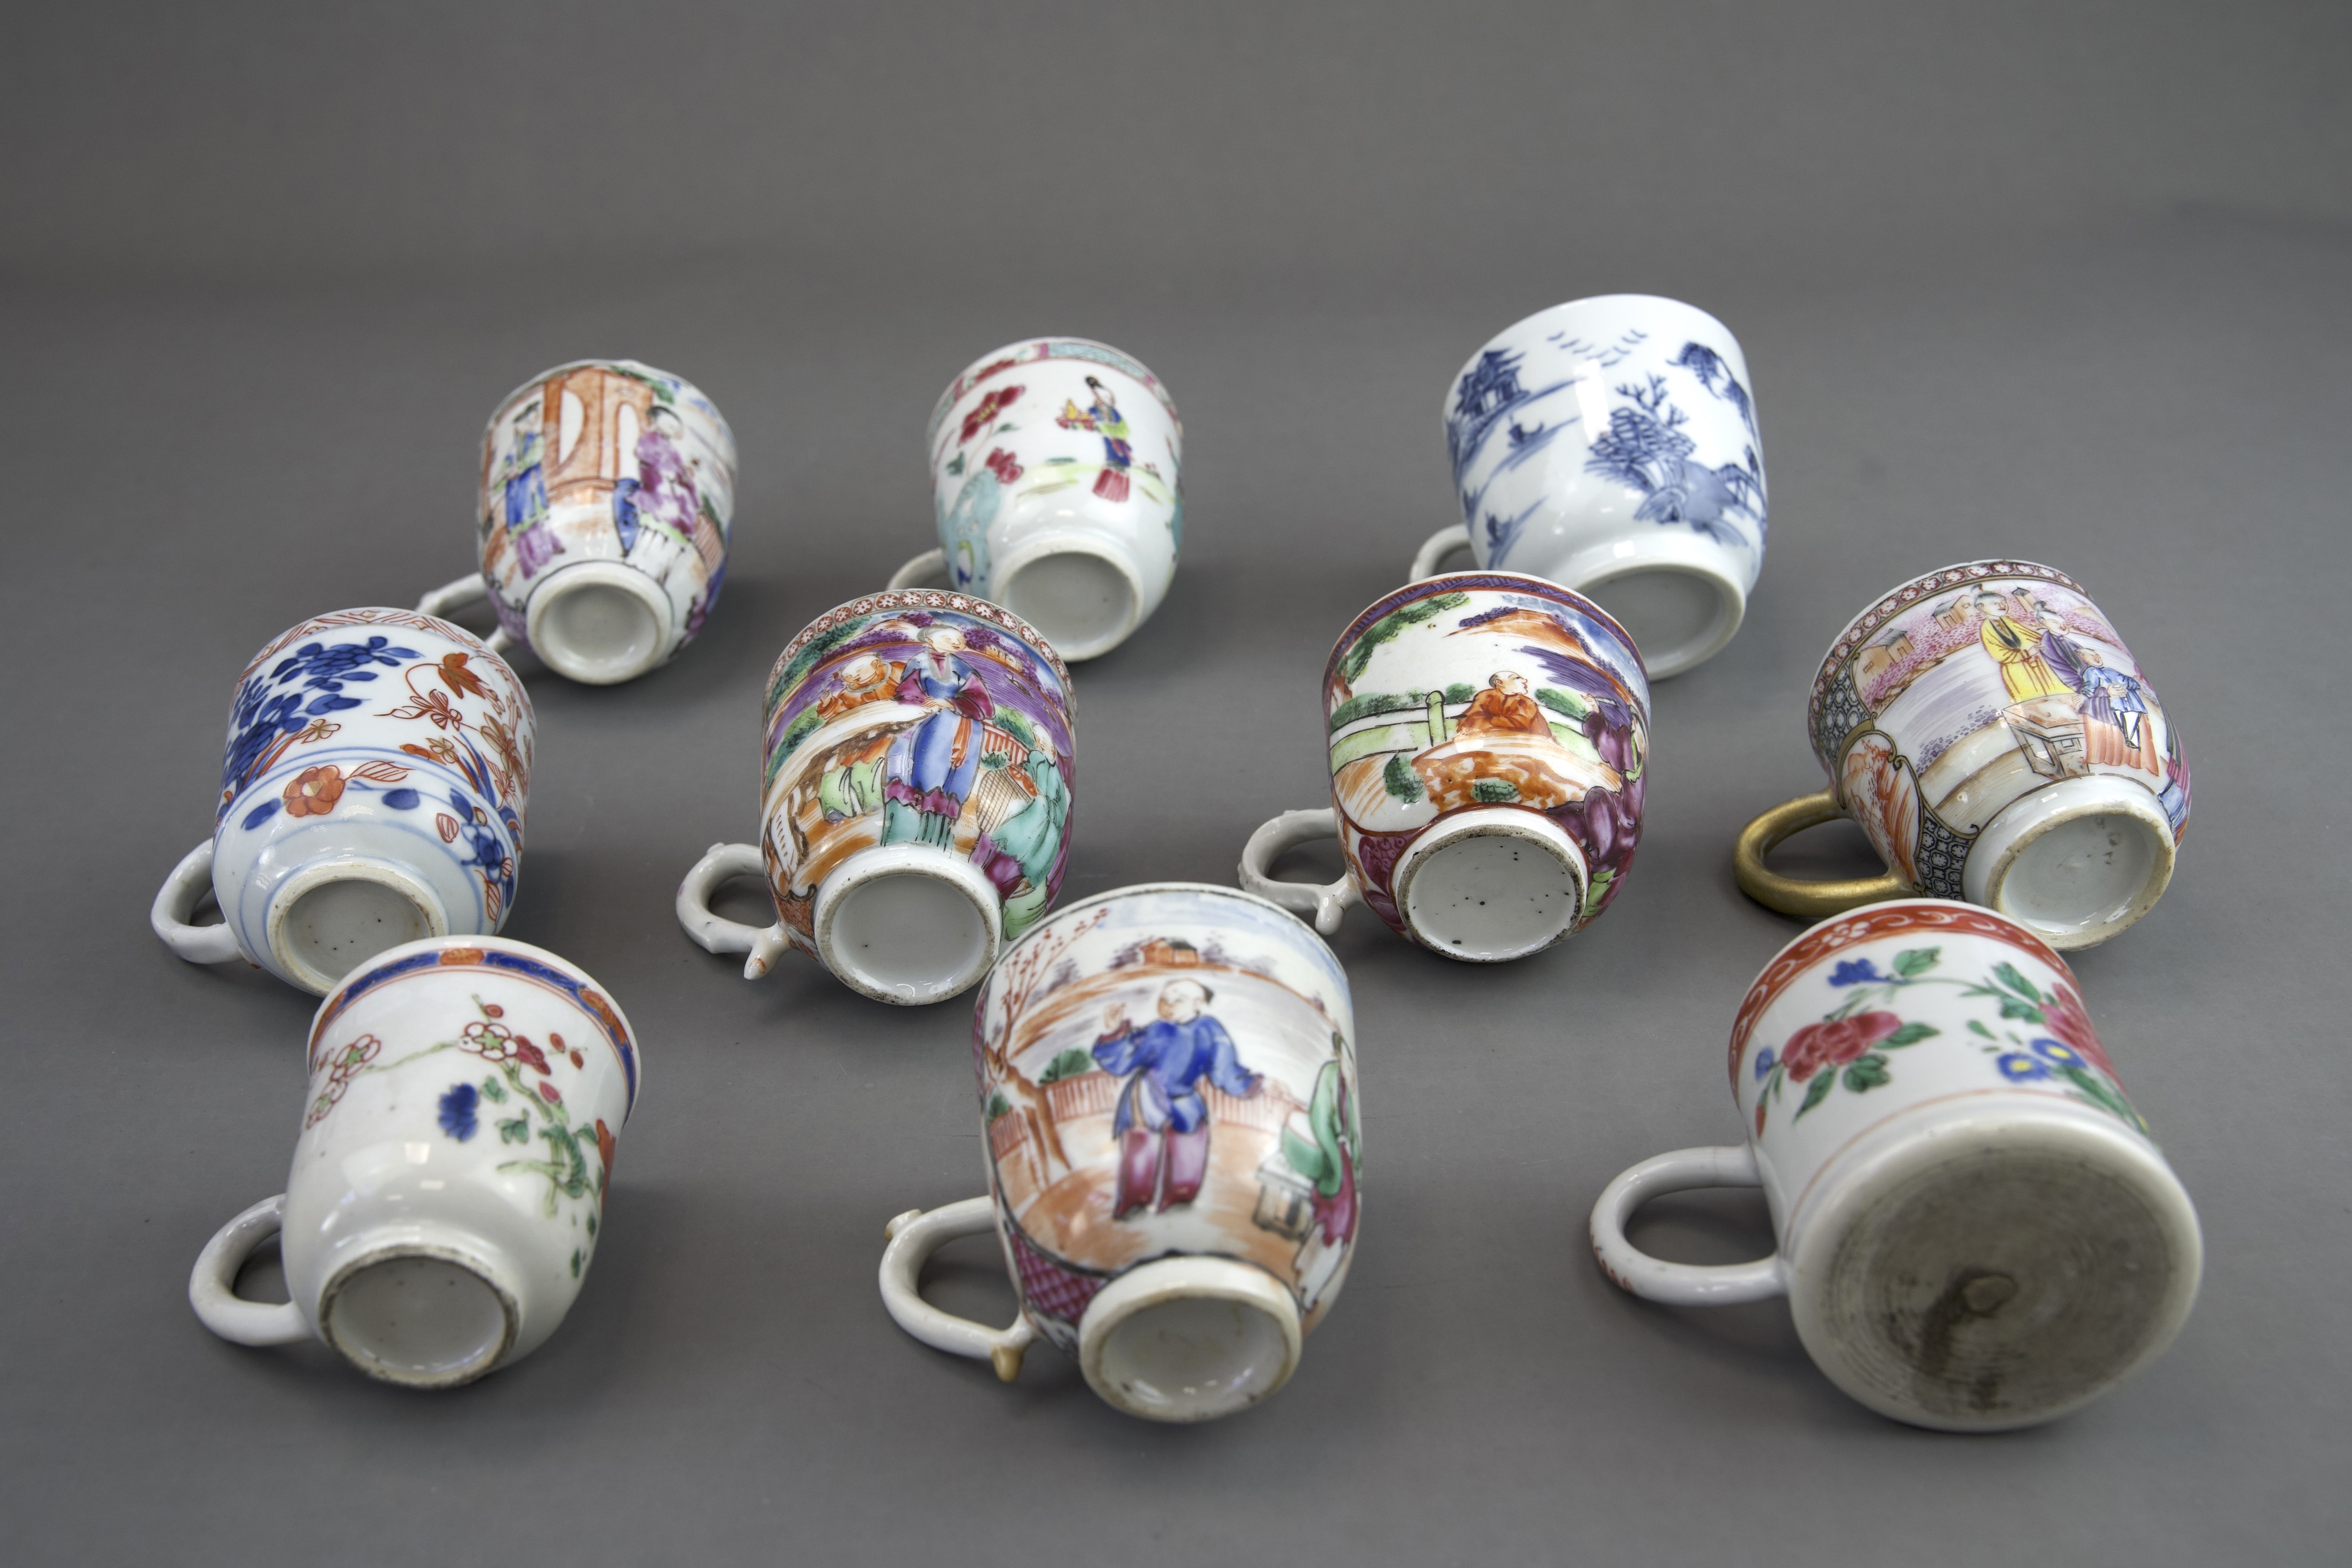 A Set of 10 Blue and White and 'famille rose' Coffee Cups, 18th century - Image 6 of 6